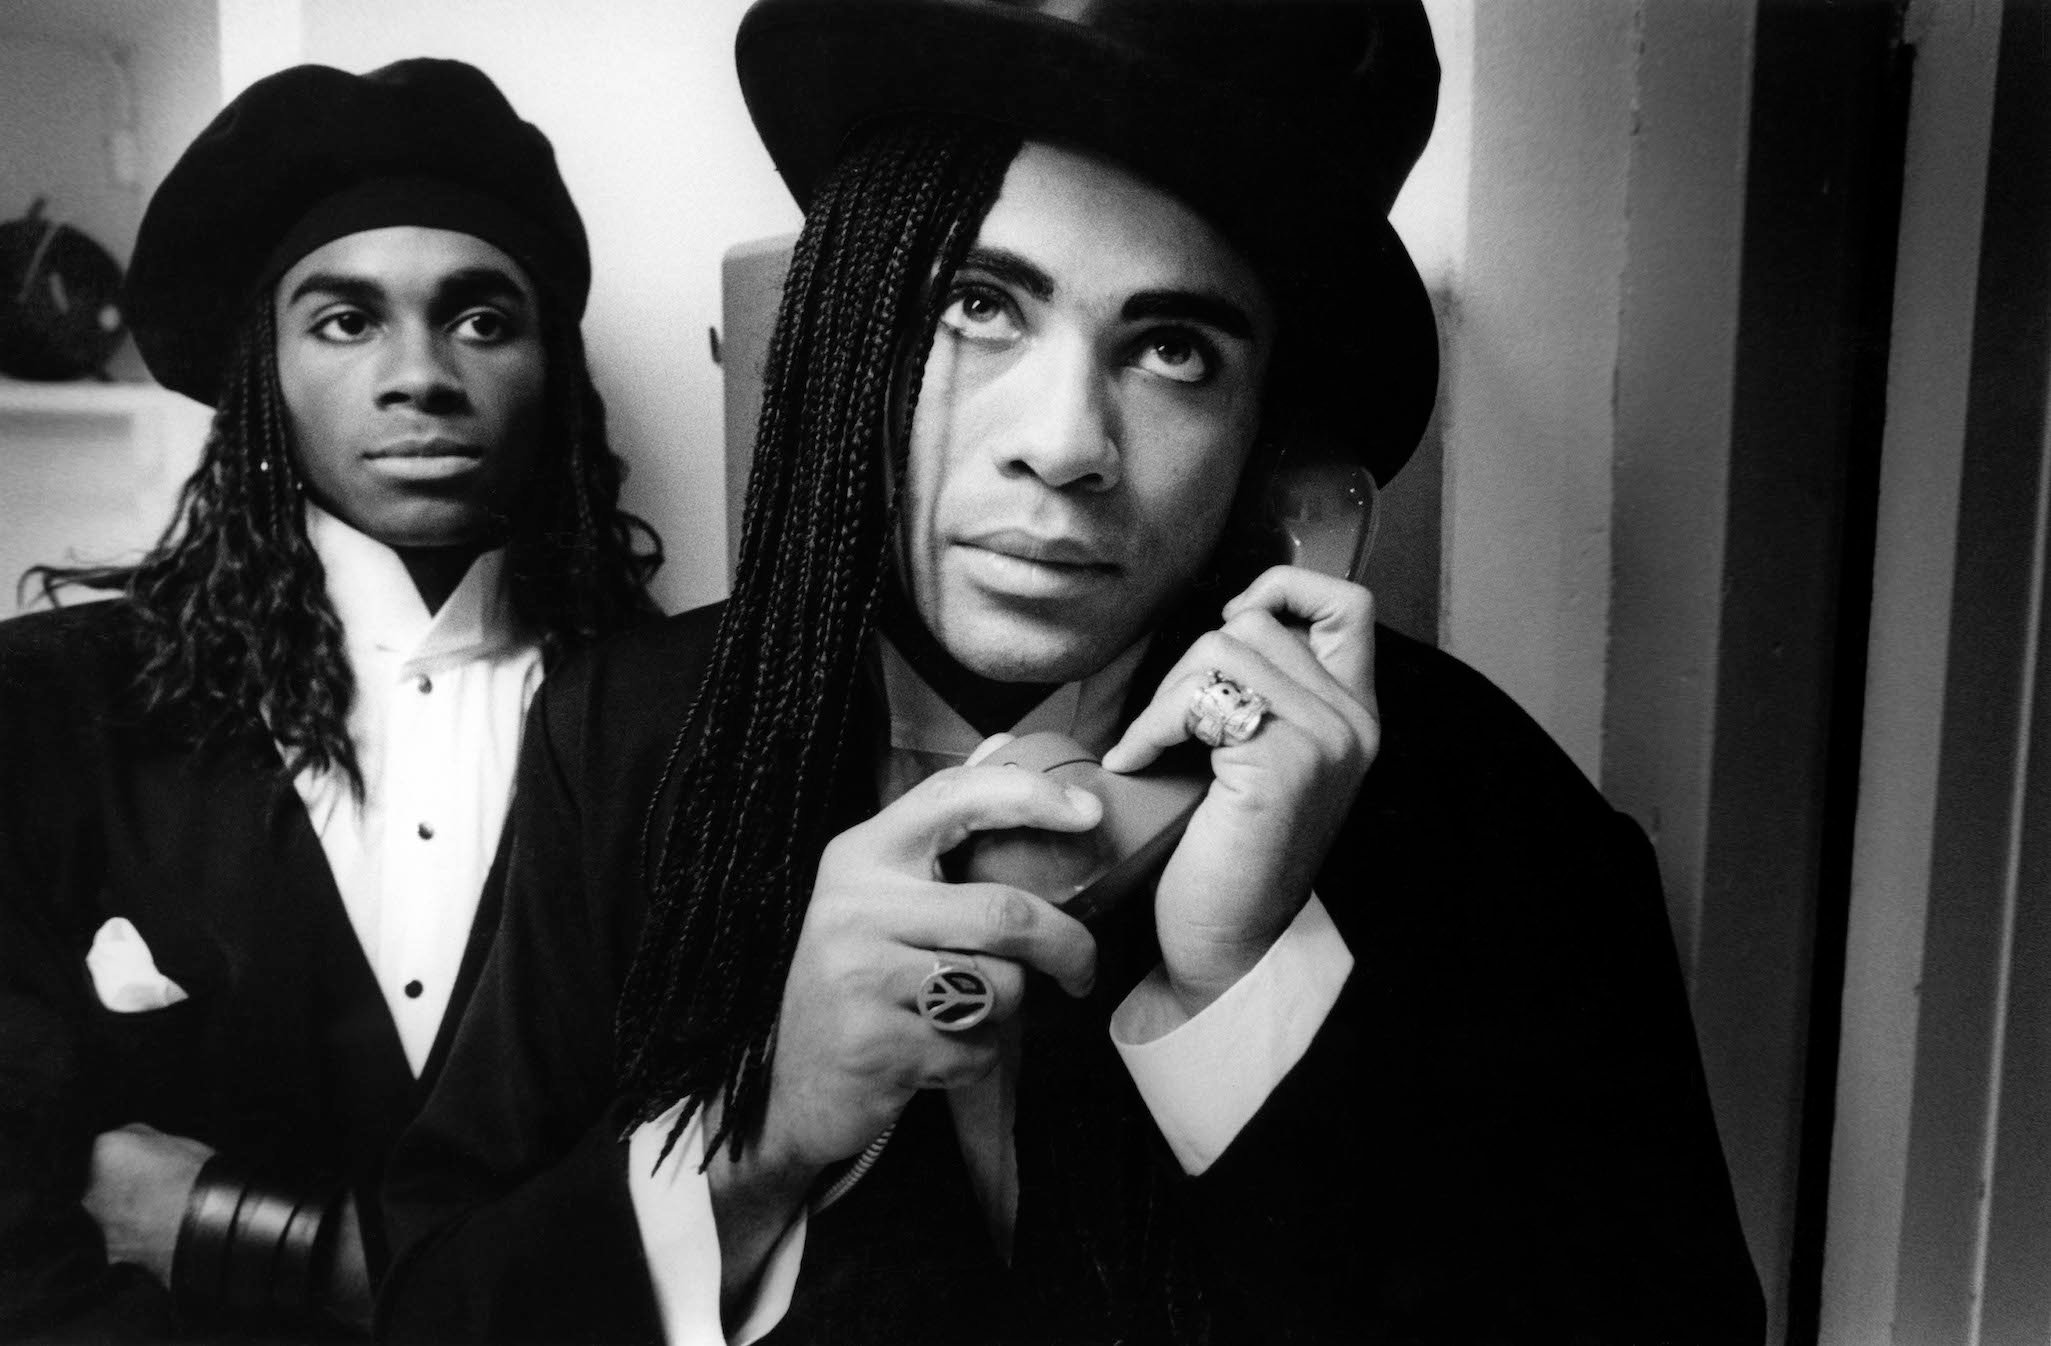 Milli Vanilli duo Fab Morvan and Rob Pilatus in a black and white portrait